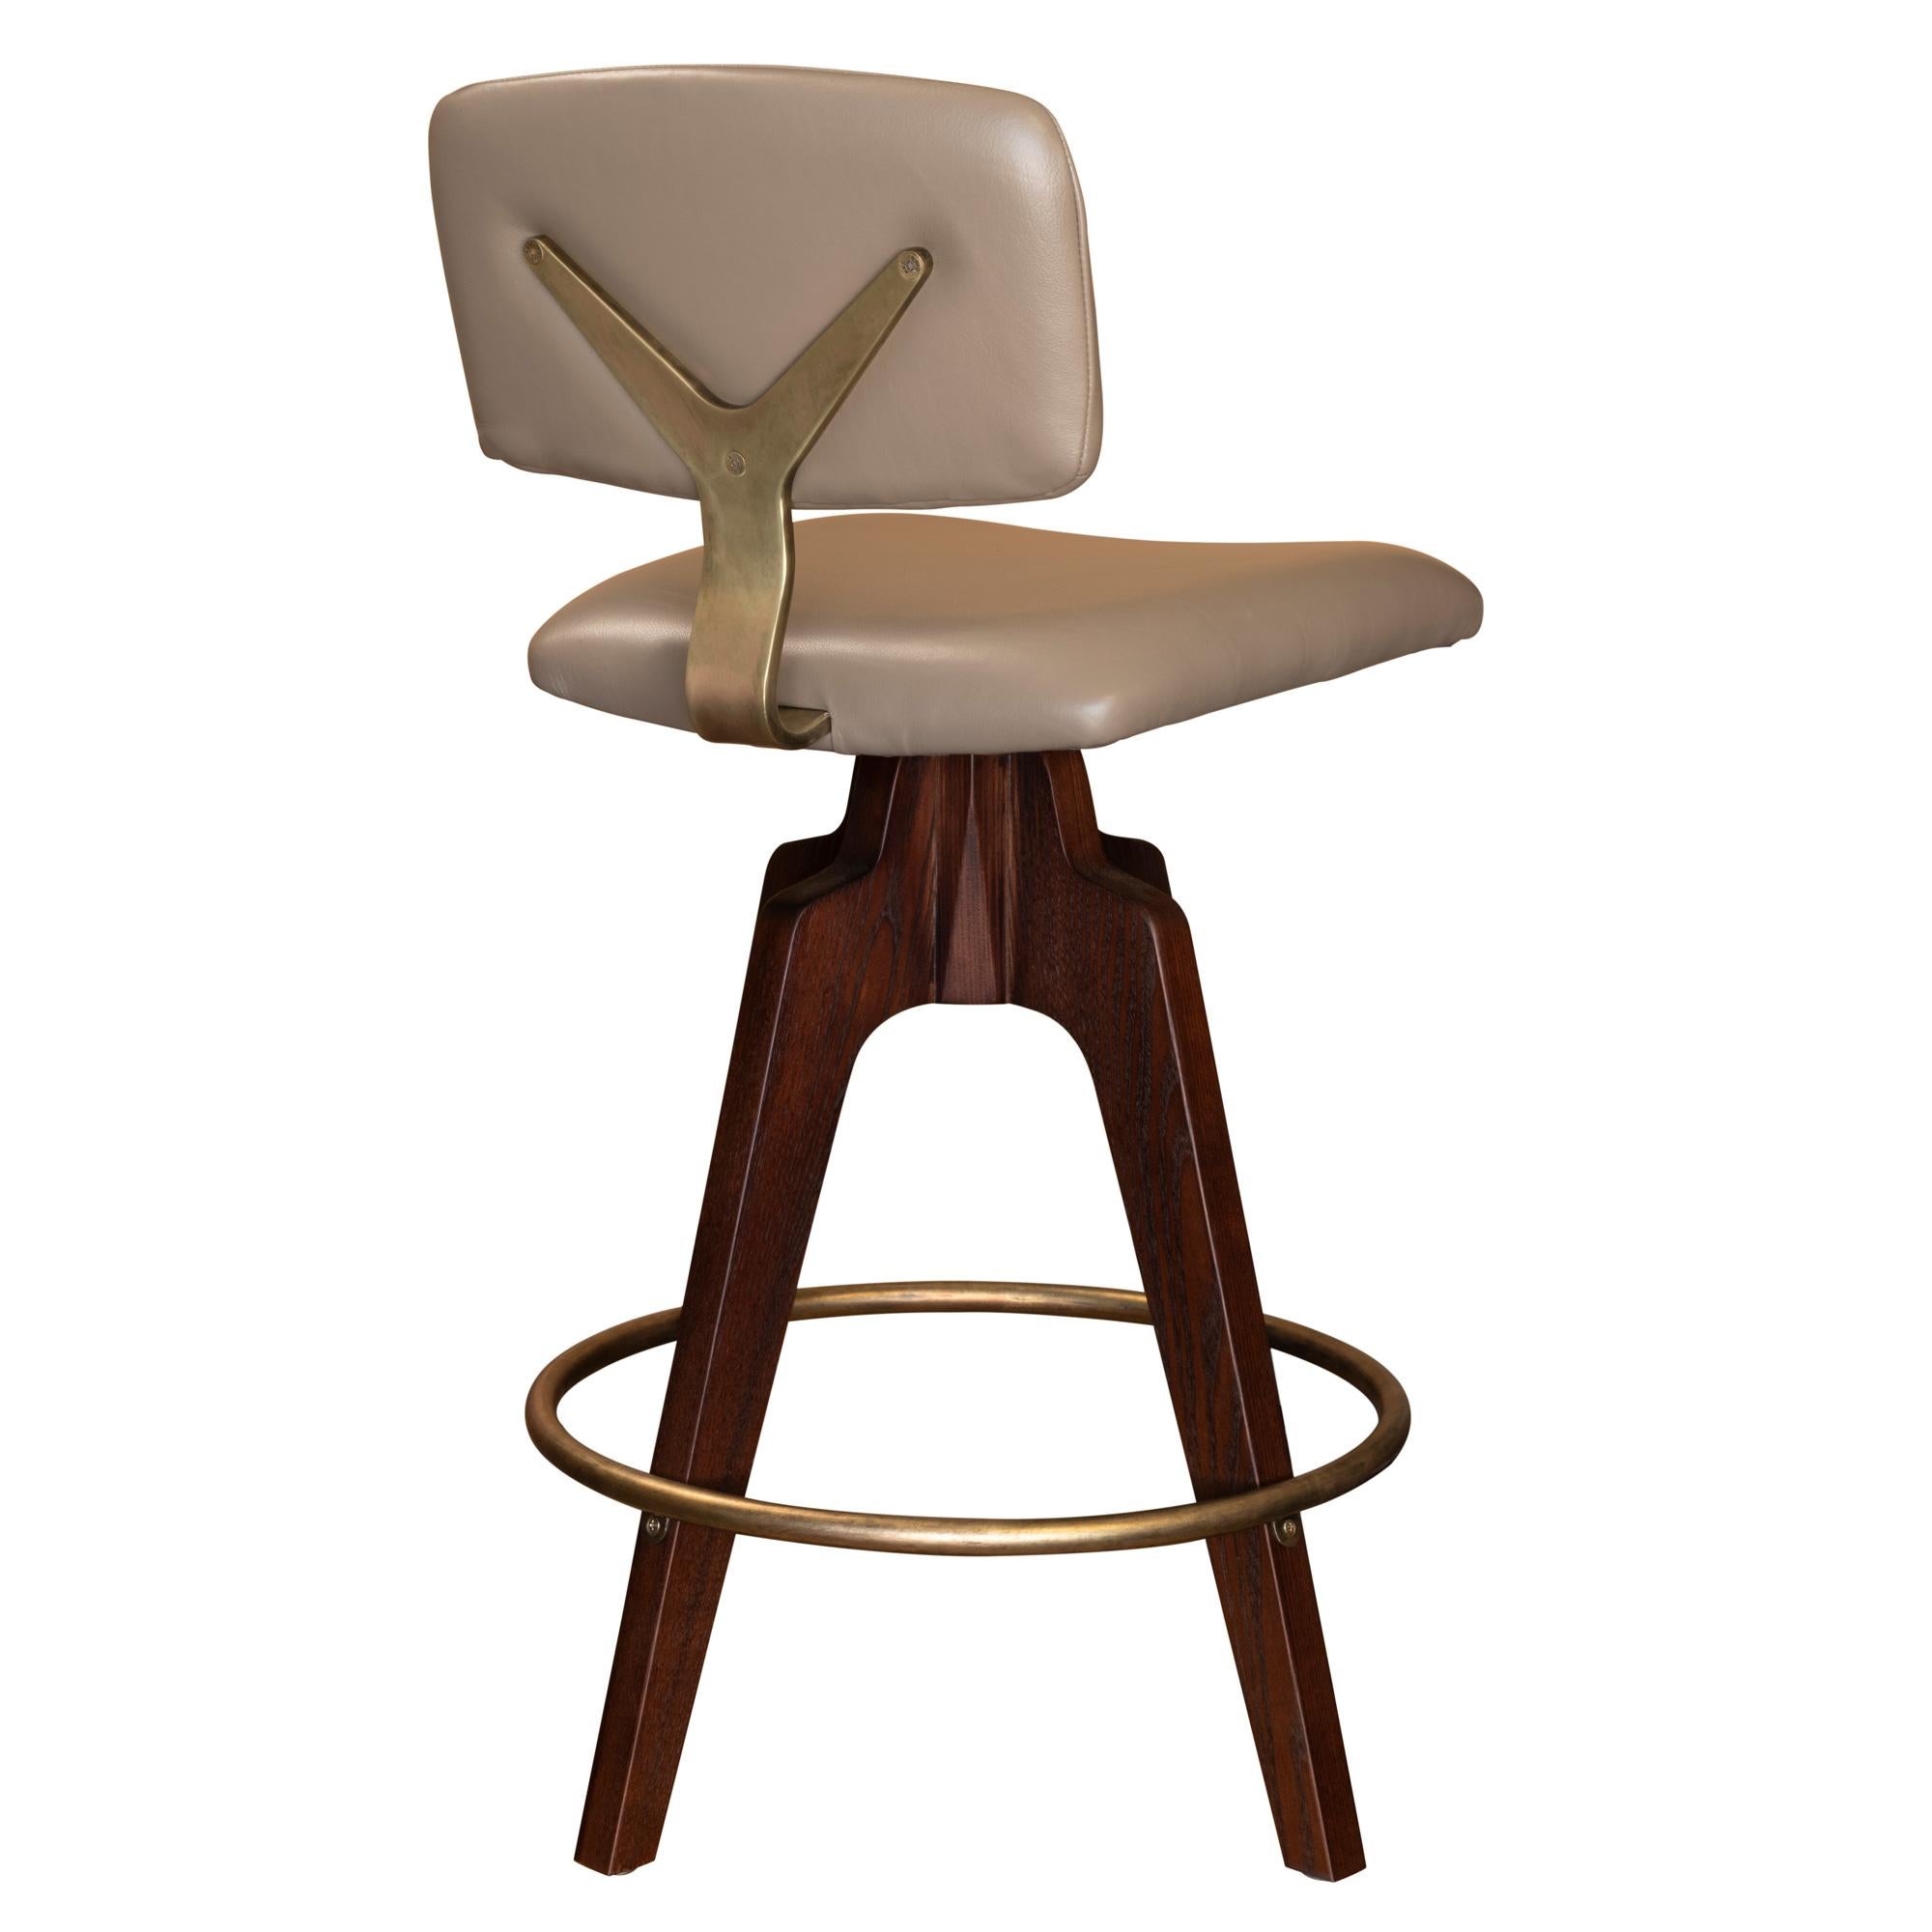 Metal Reeves Swivel Bar Stool W/ Ash legs stained Walnut, Leather & Brass Finish.  For Sale